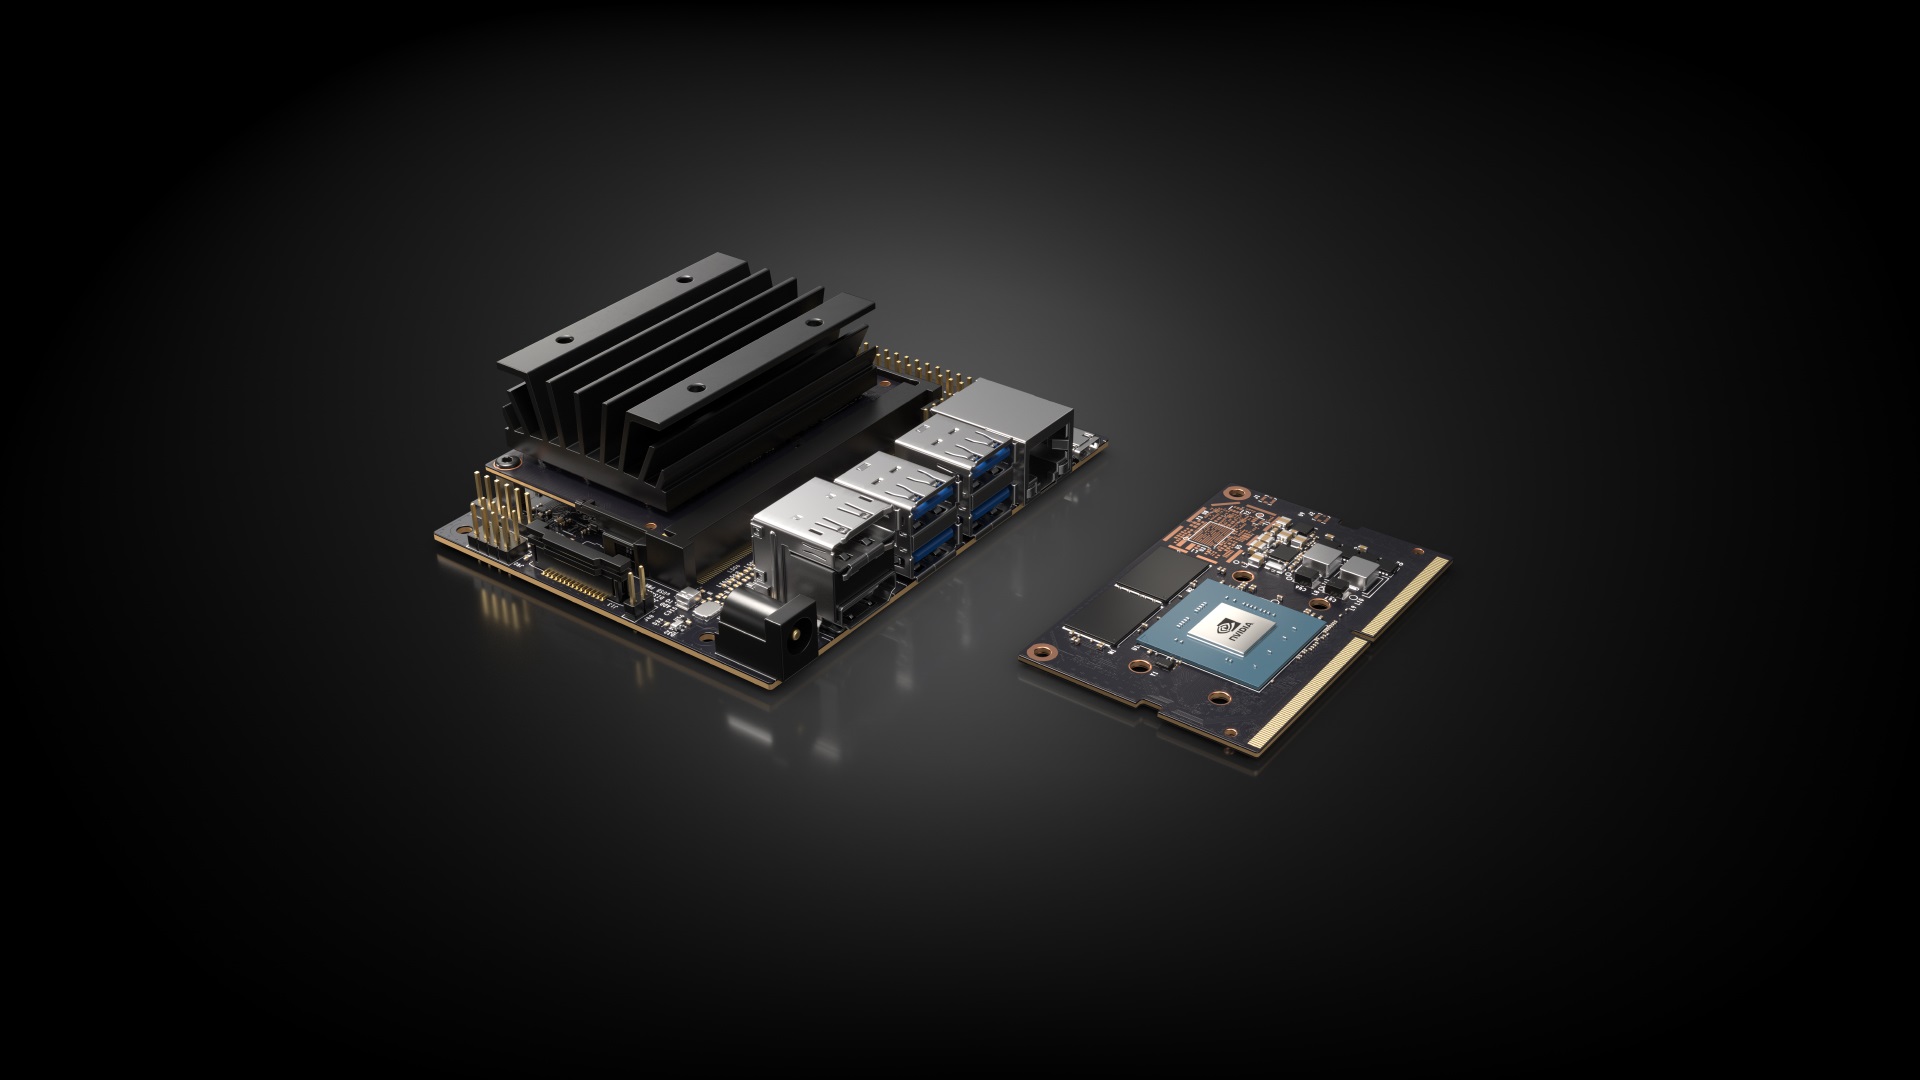 Photo of the NVIDIA Jetson Nano showing its ports, against a black gradient background.